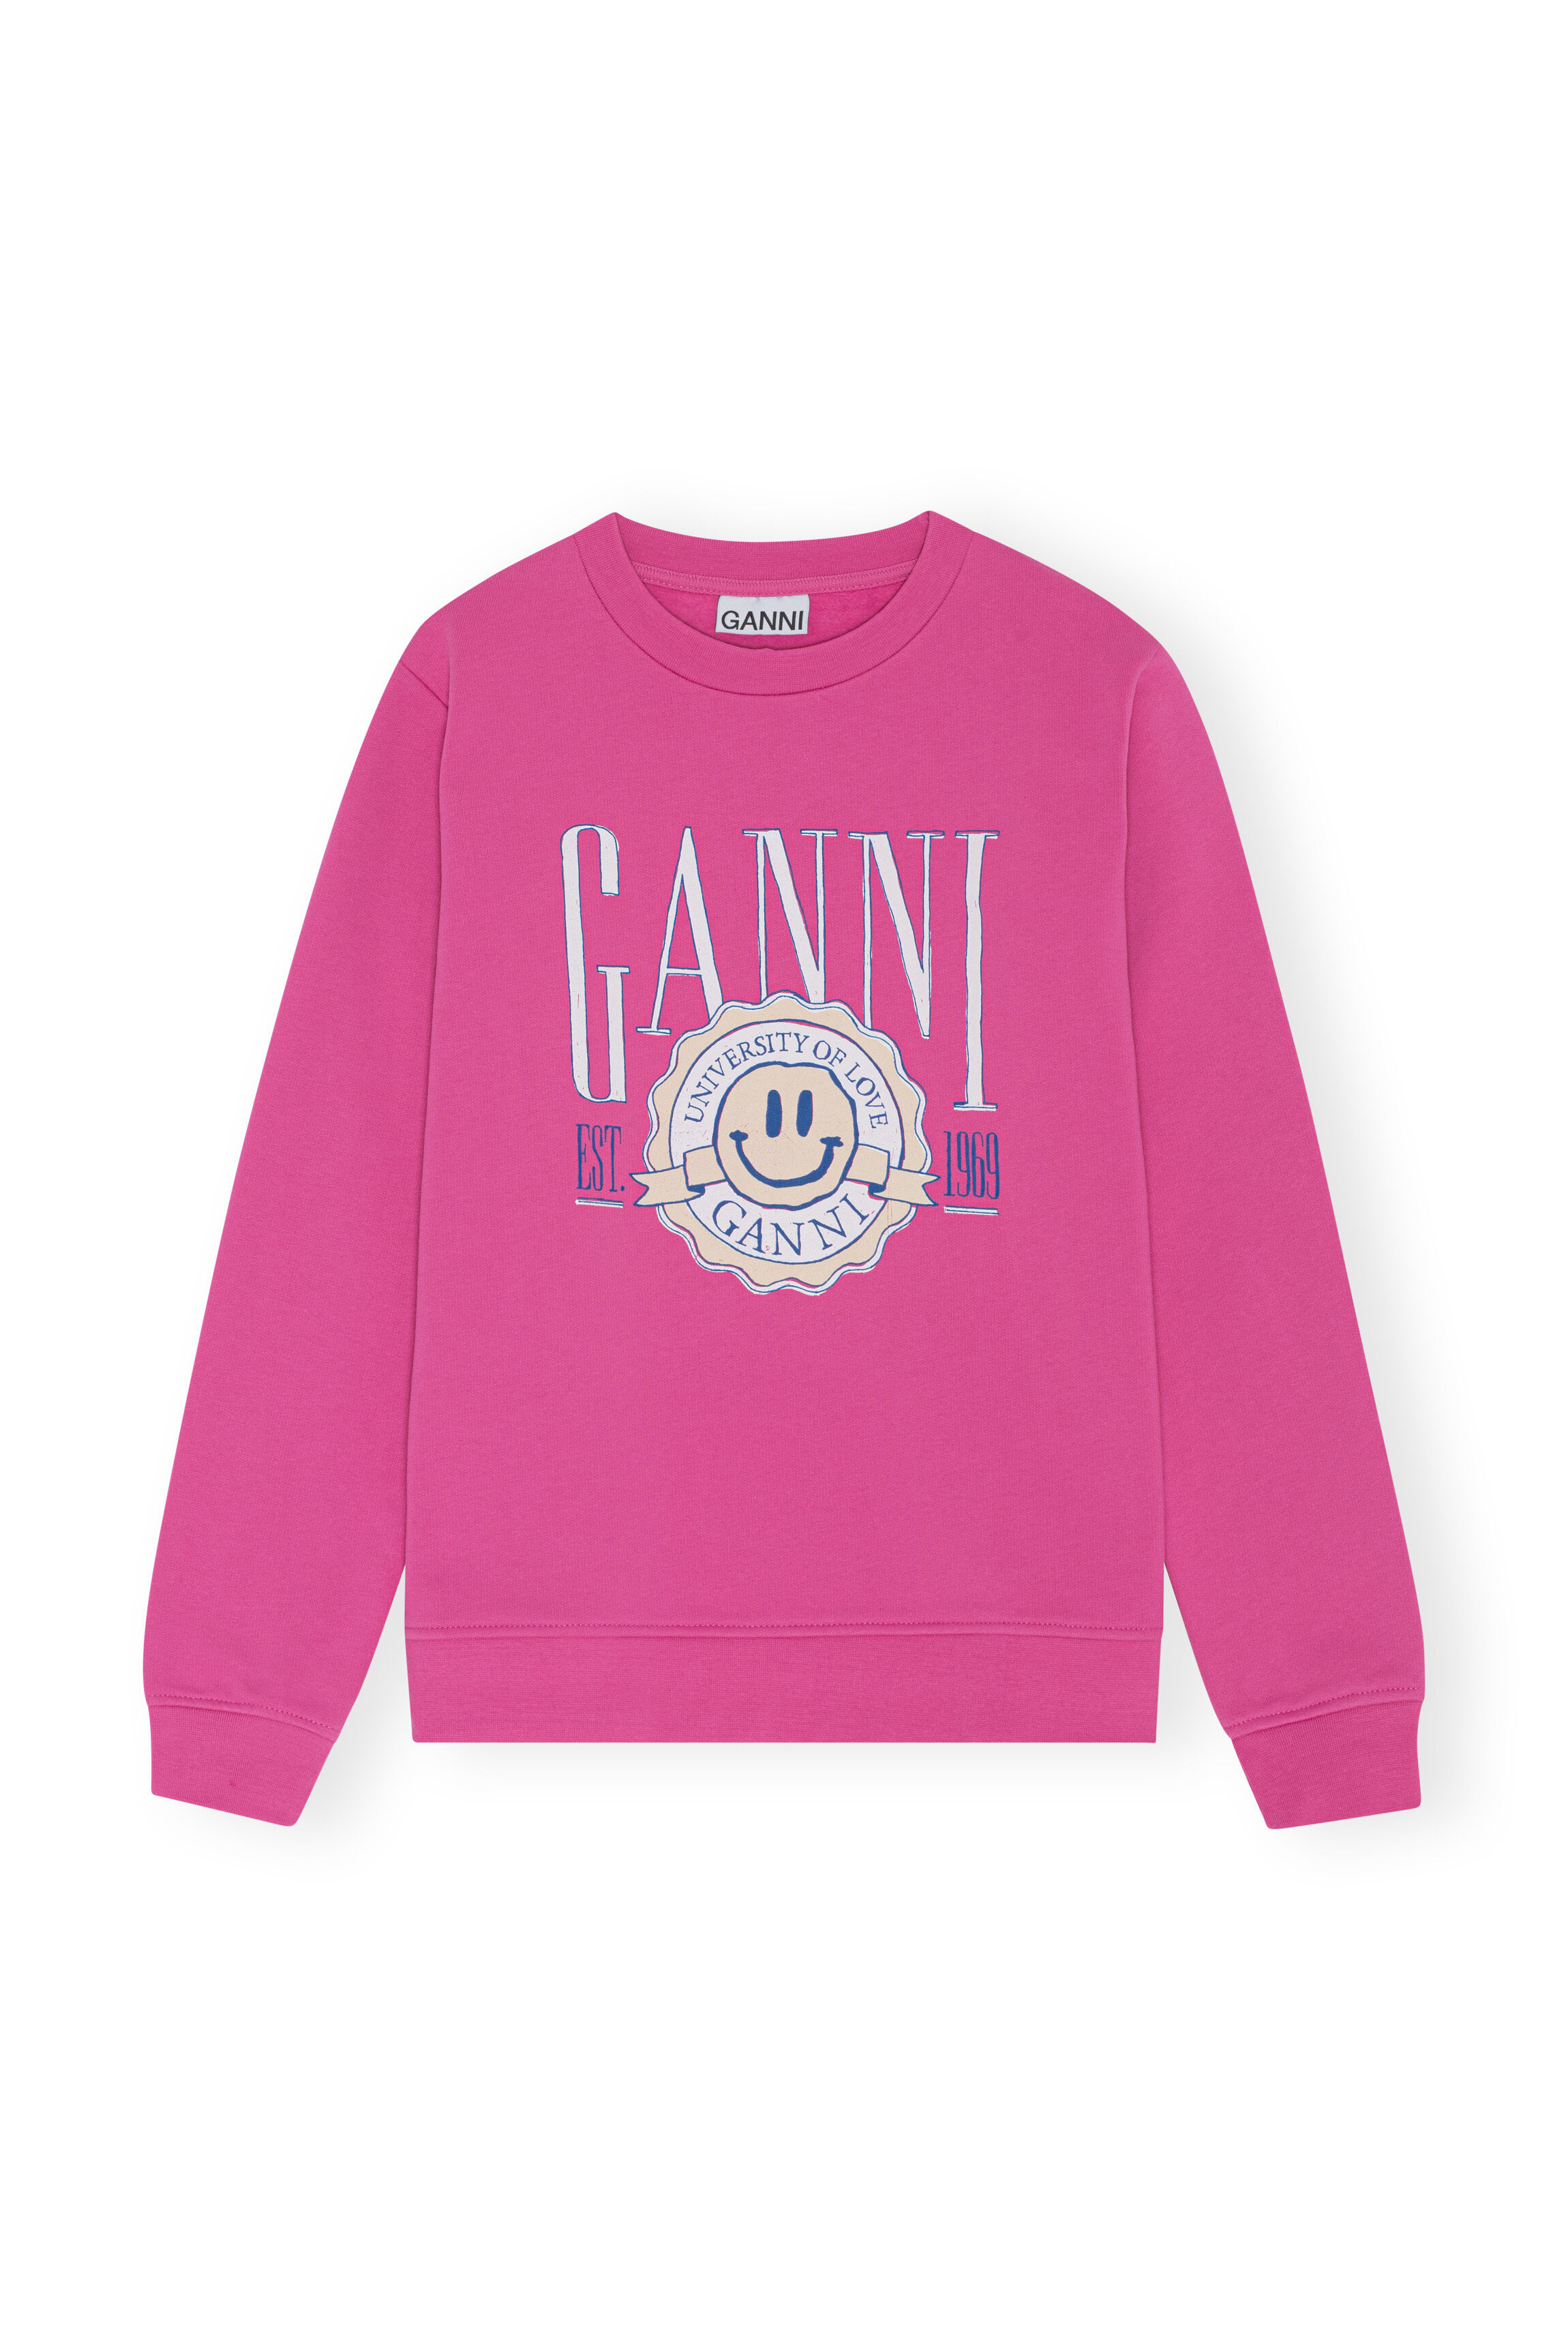 Gifts | Self Gifts & Gift Cards | GANNI